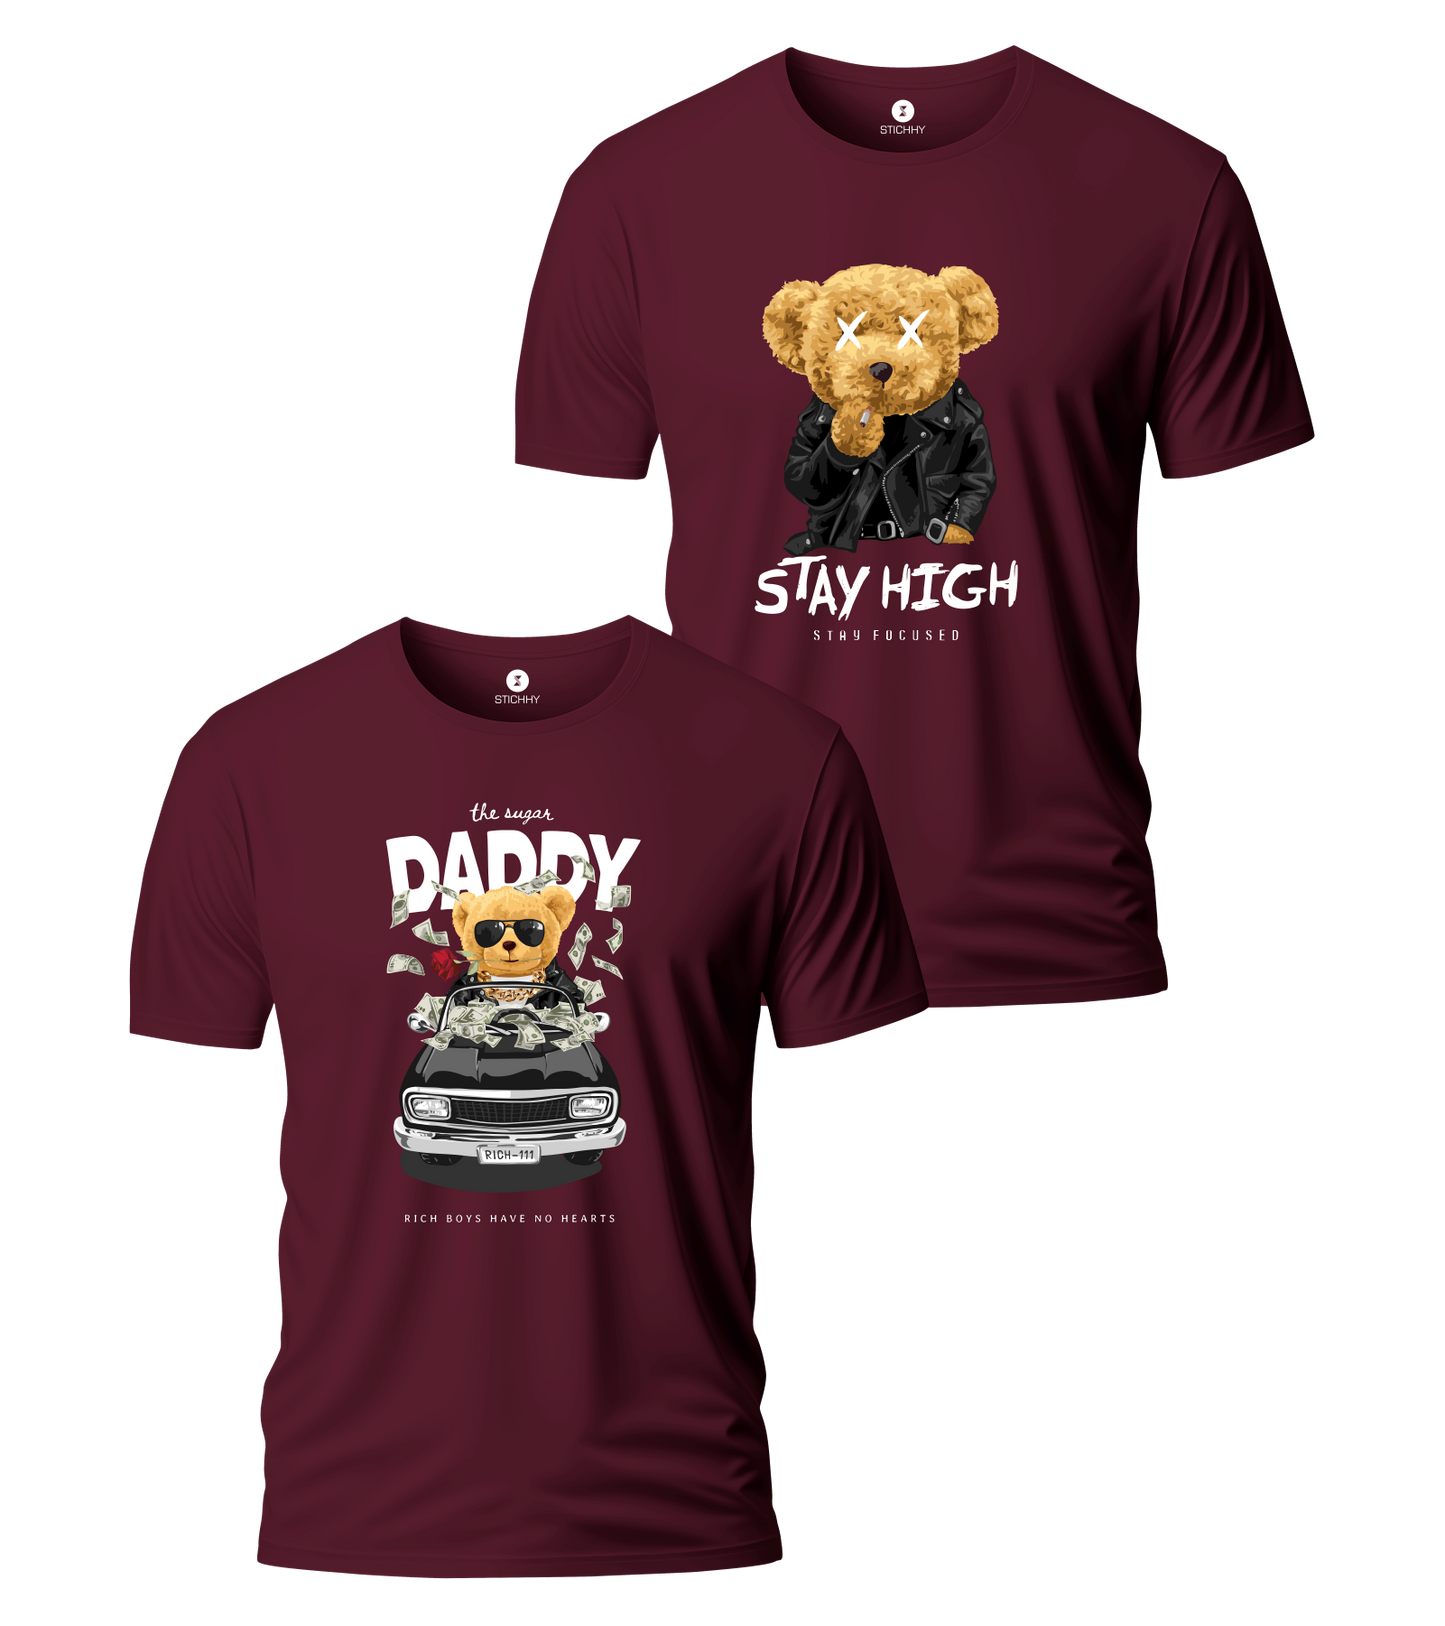 DADDY X STAY HIGH T-SHIRT BUY 1 GET 1 FREE